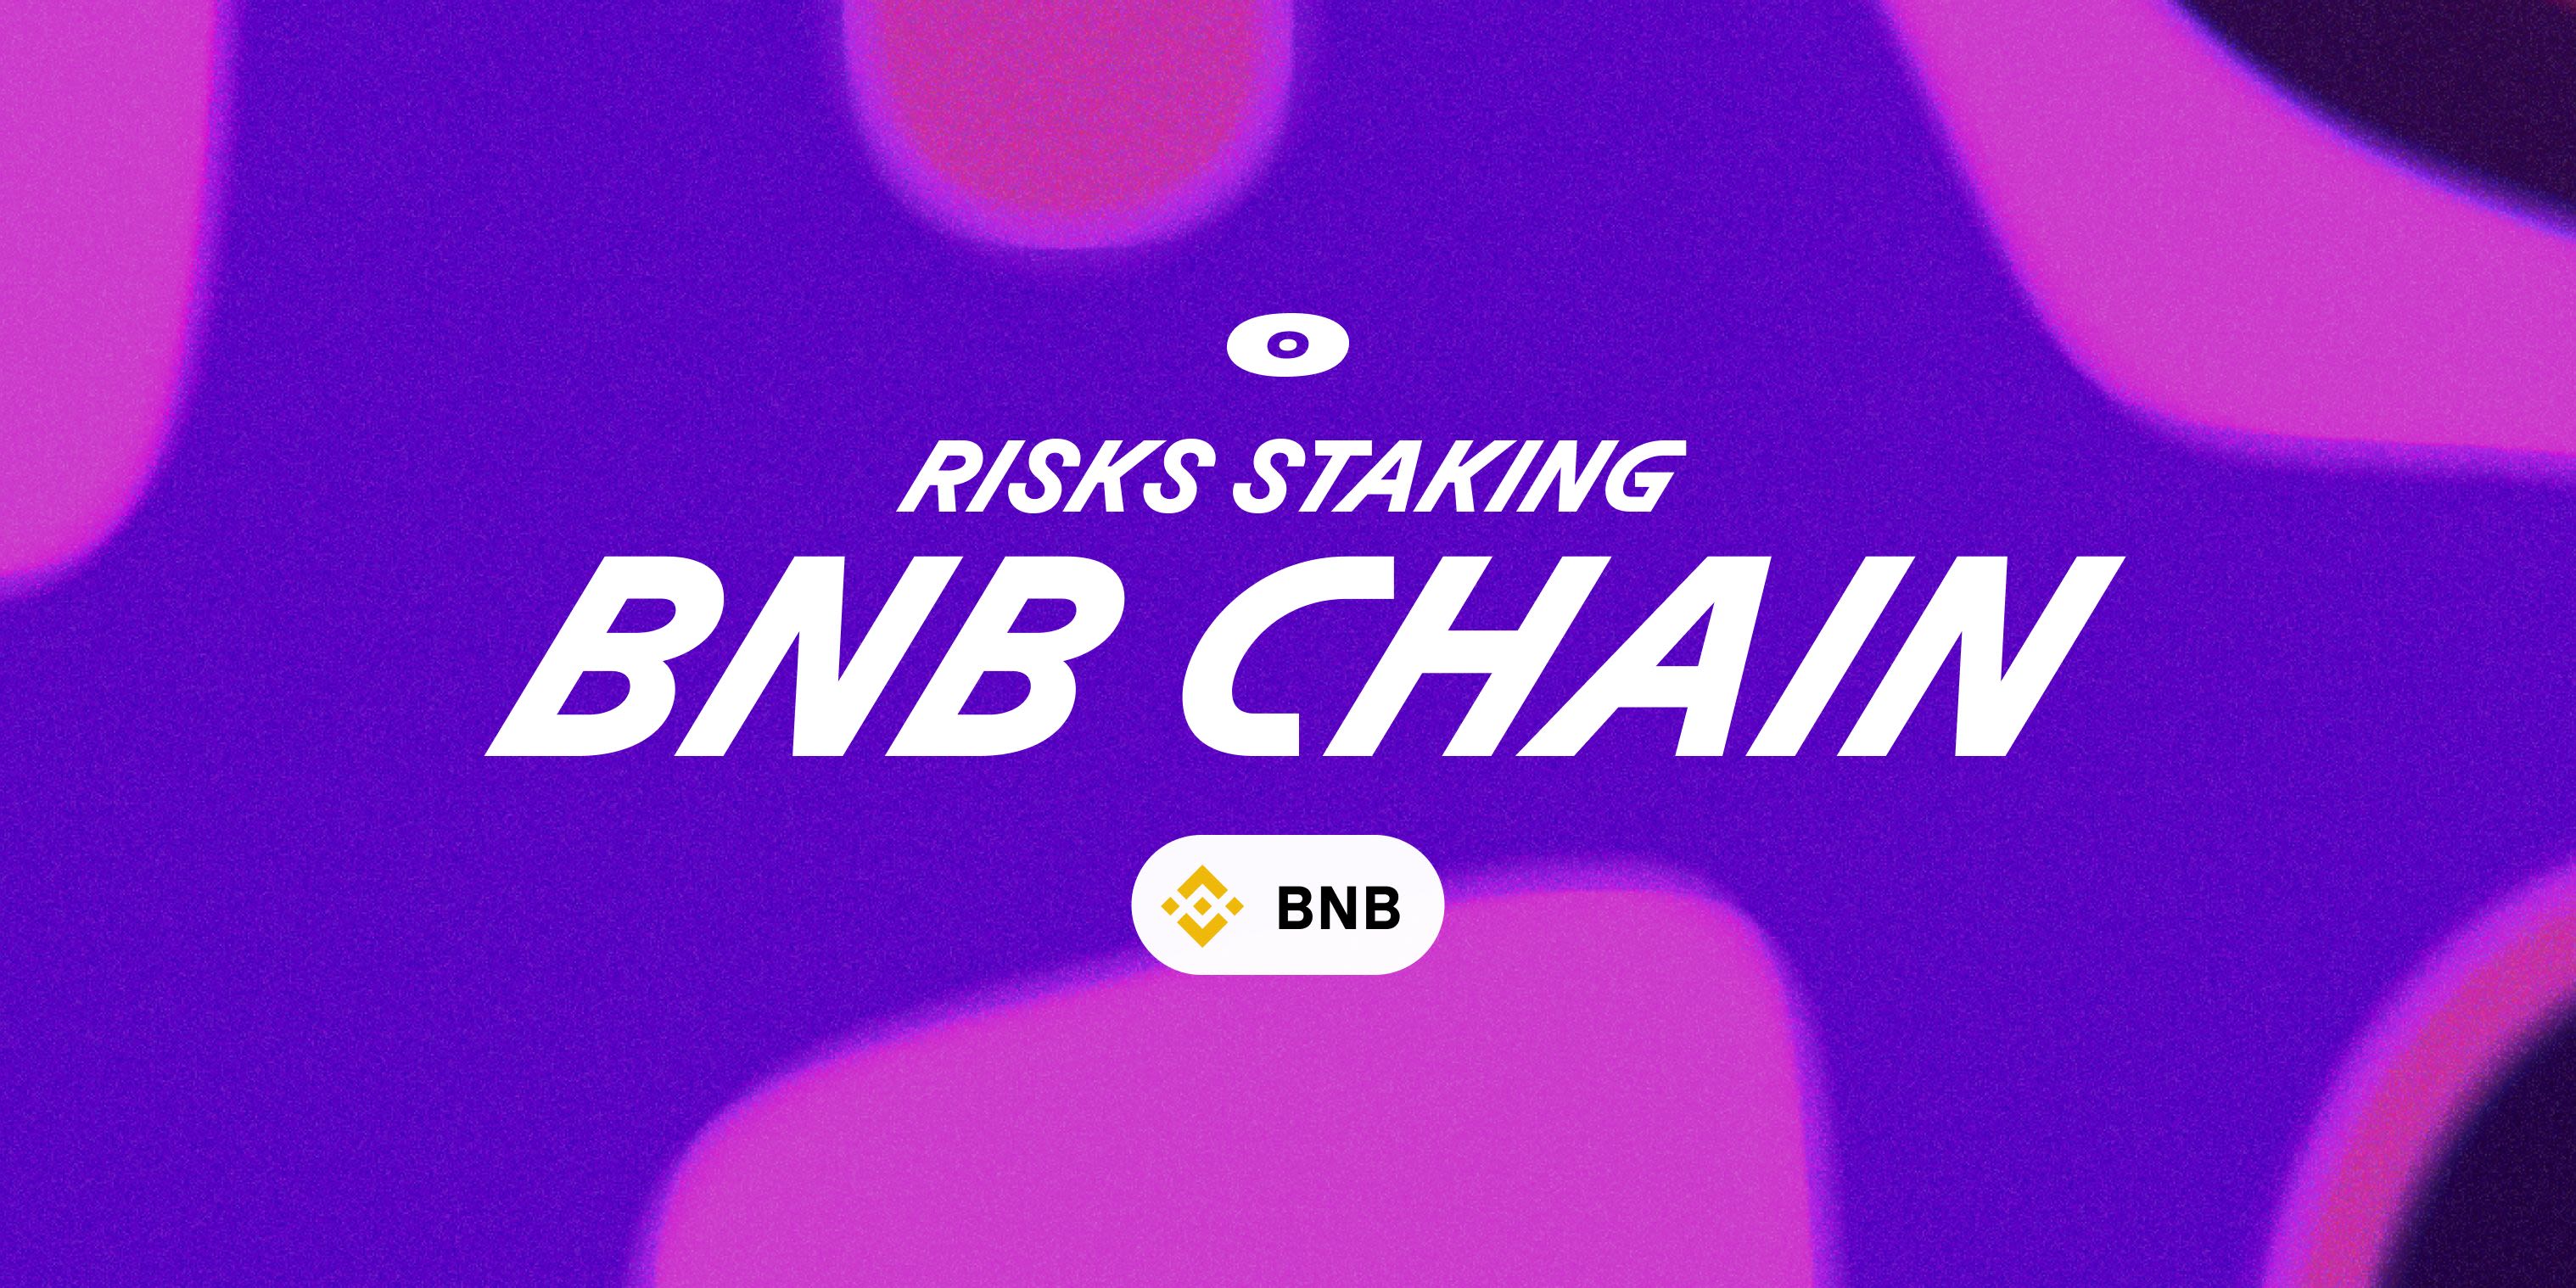 Cover Image for Risks of staking BNB